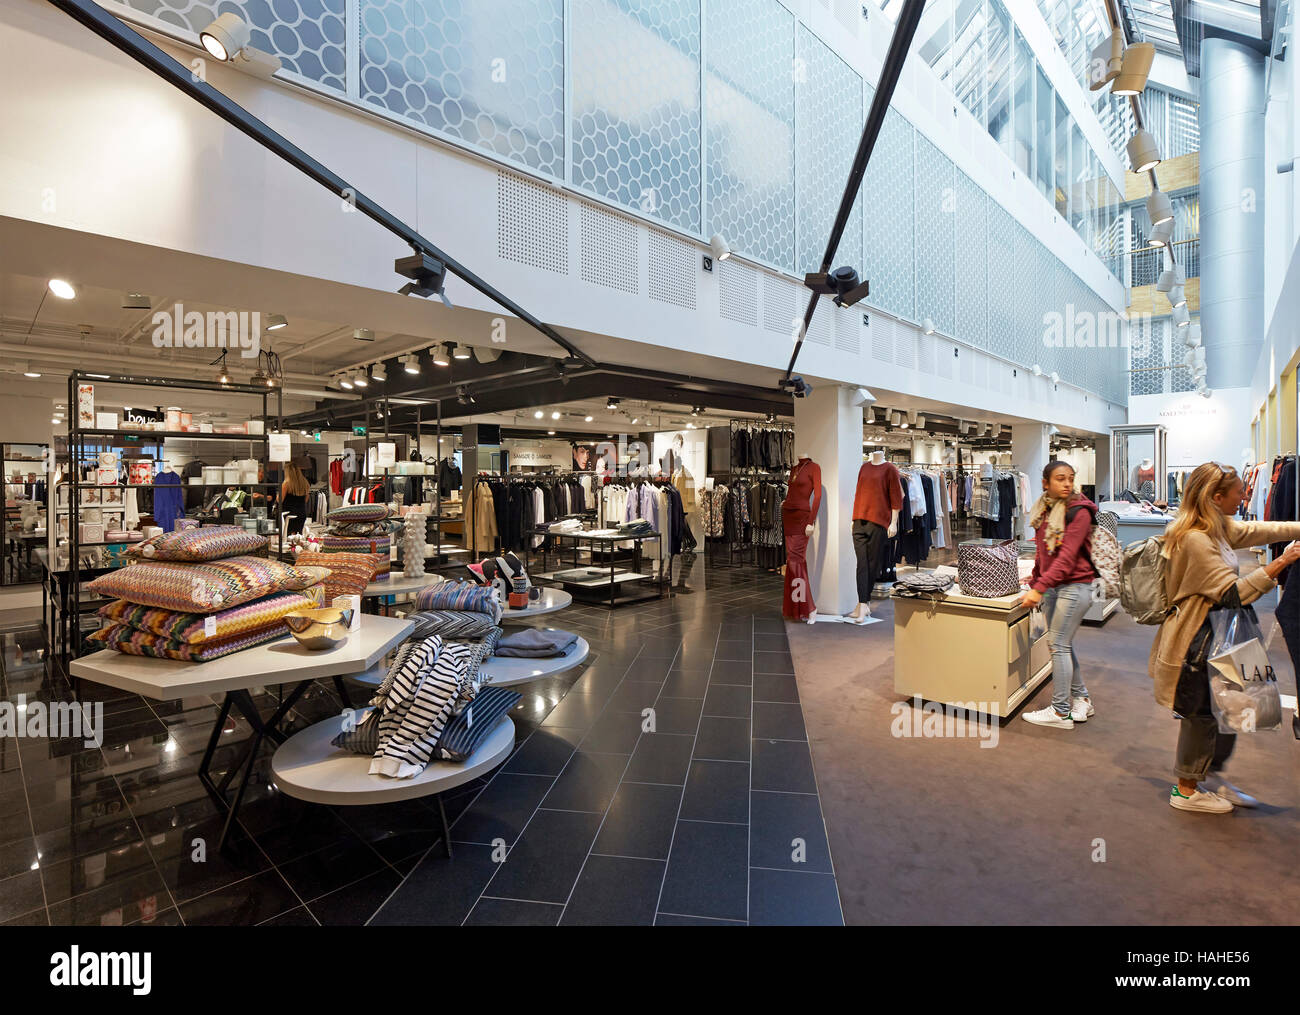 Interior view in Oslo department store. Architectural Stock, Various, United Kingdom. Architect: n/a, 2016. Stock Photo